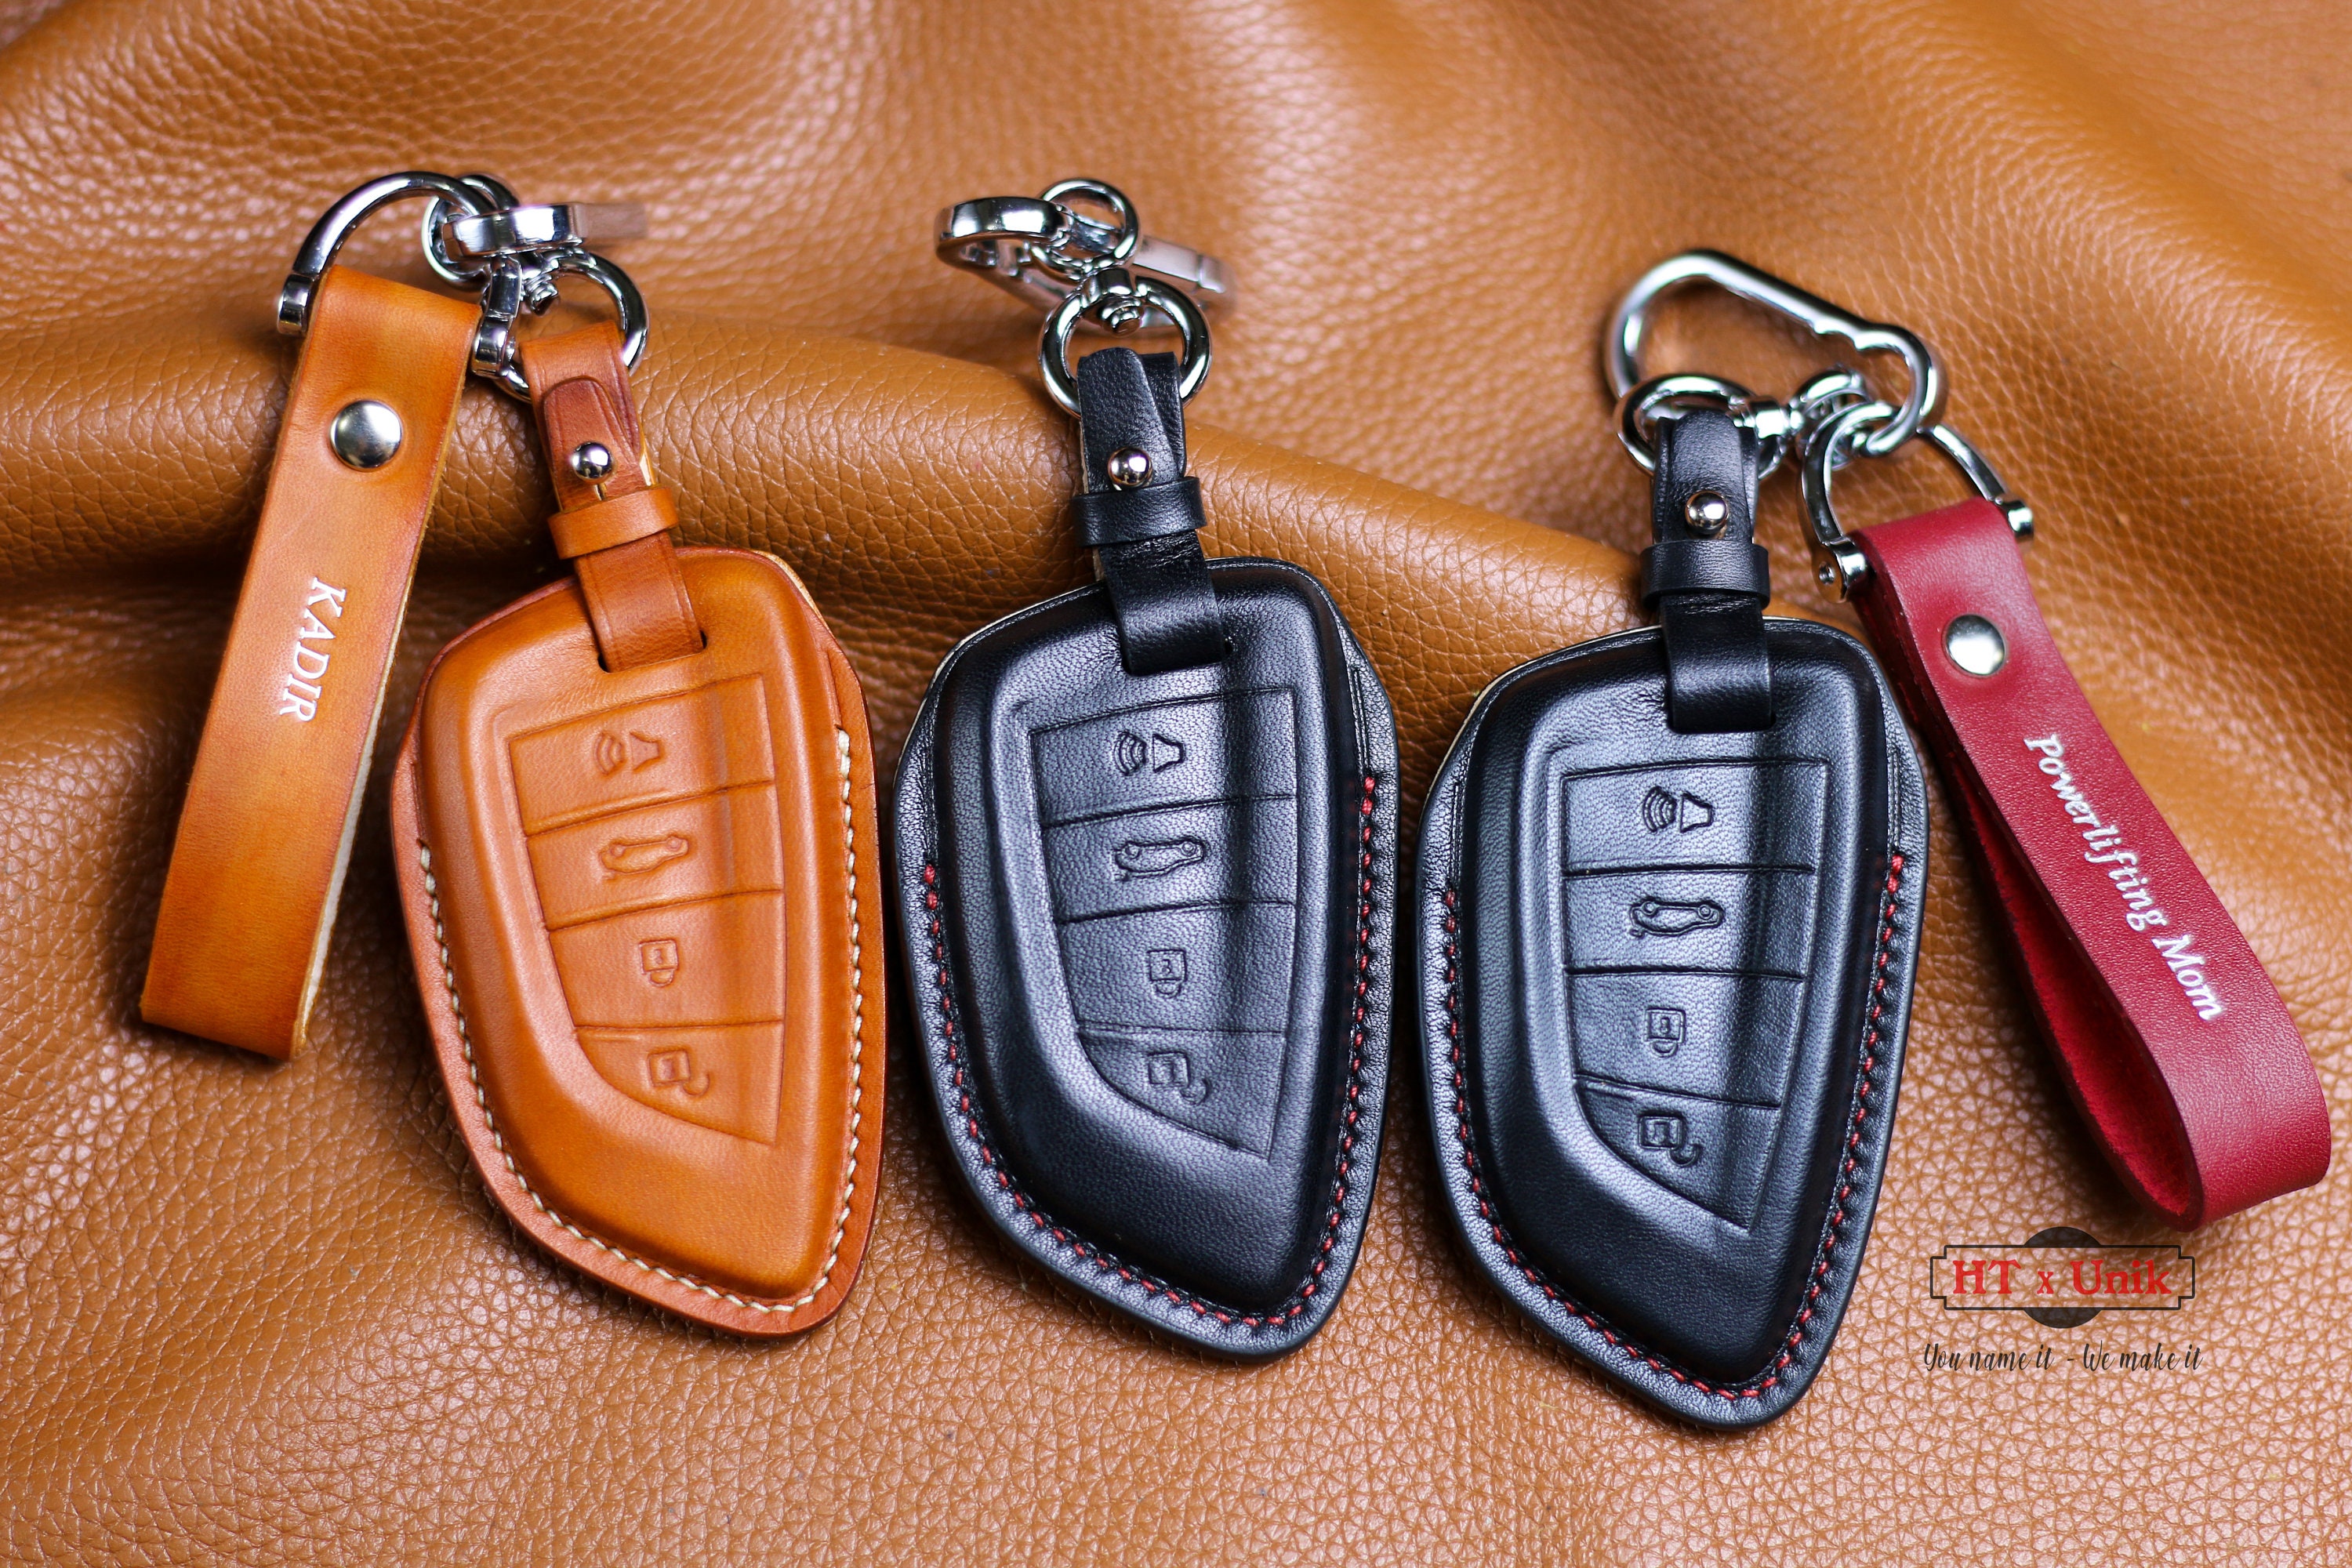 Luxury Leather Keyring  Made in England by Tusting